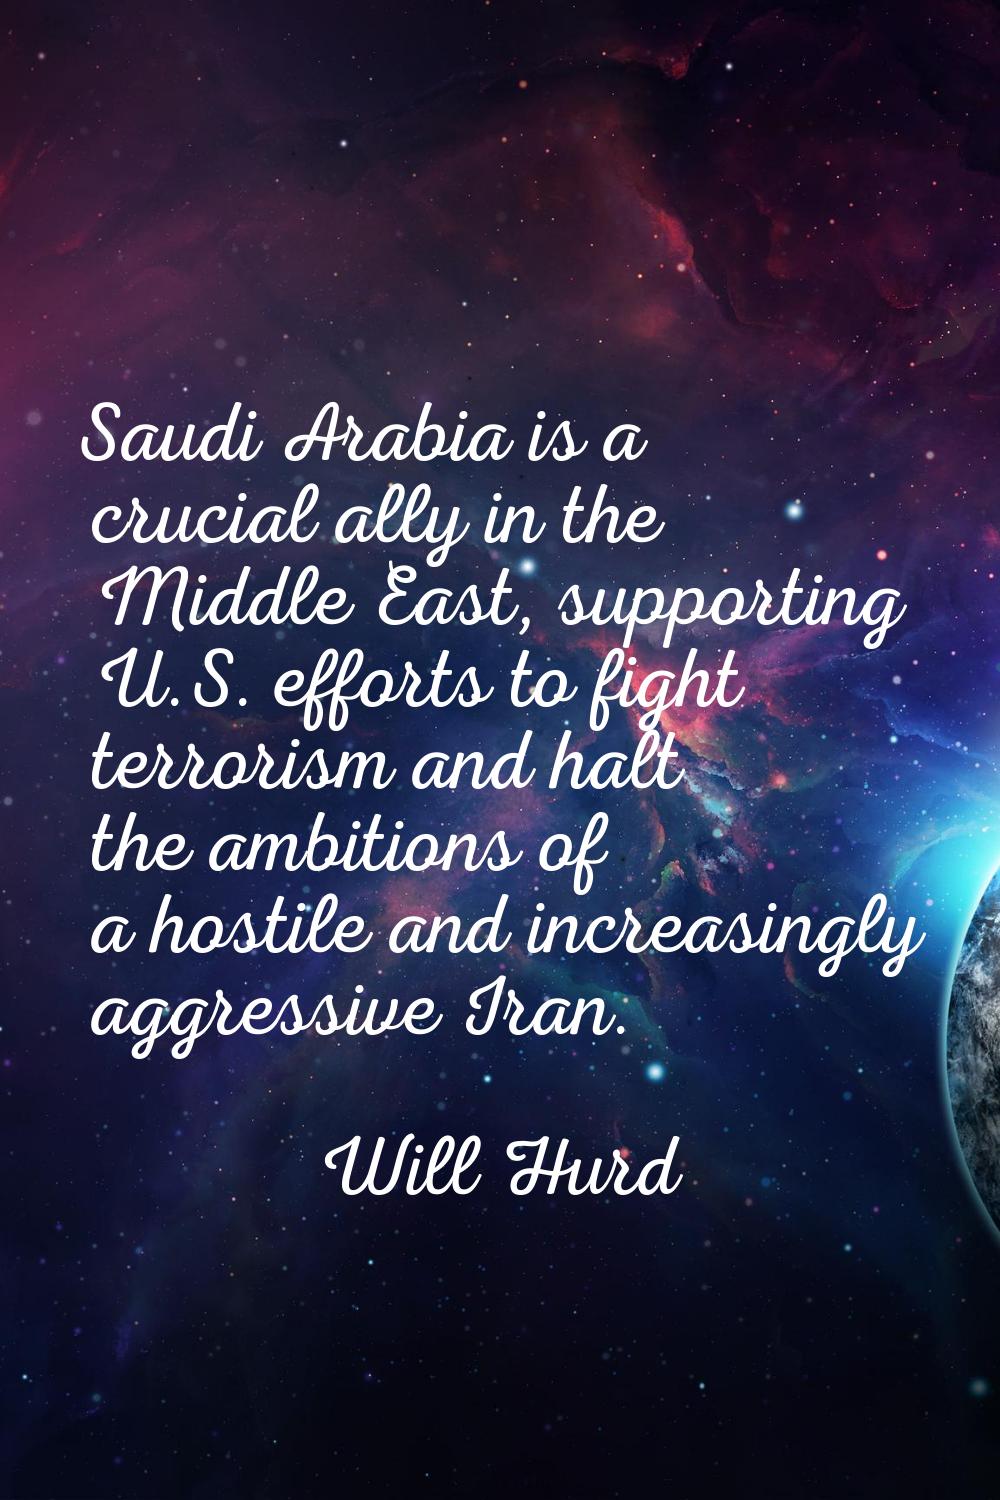 Saudi Arabia is a crucial ally in the Middle East, supporting U.S. efforts to fight terrorism and h